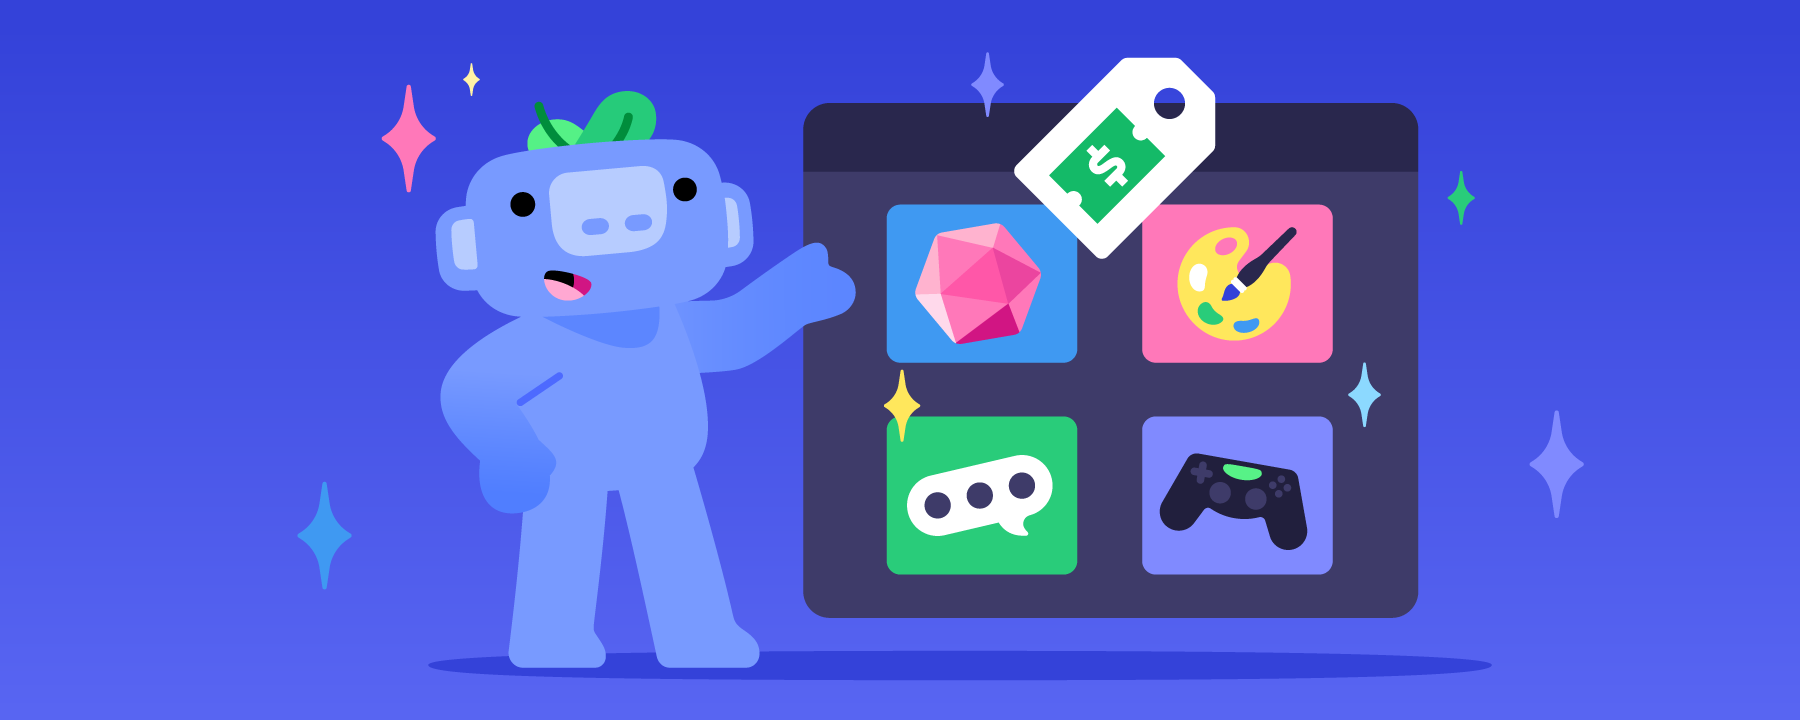 How to use Discord: Getting started guide